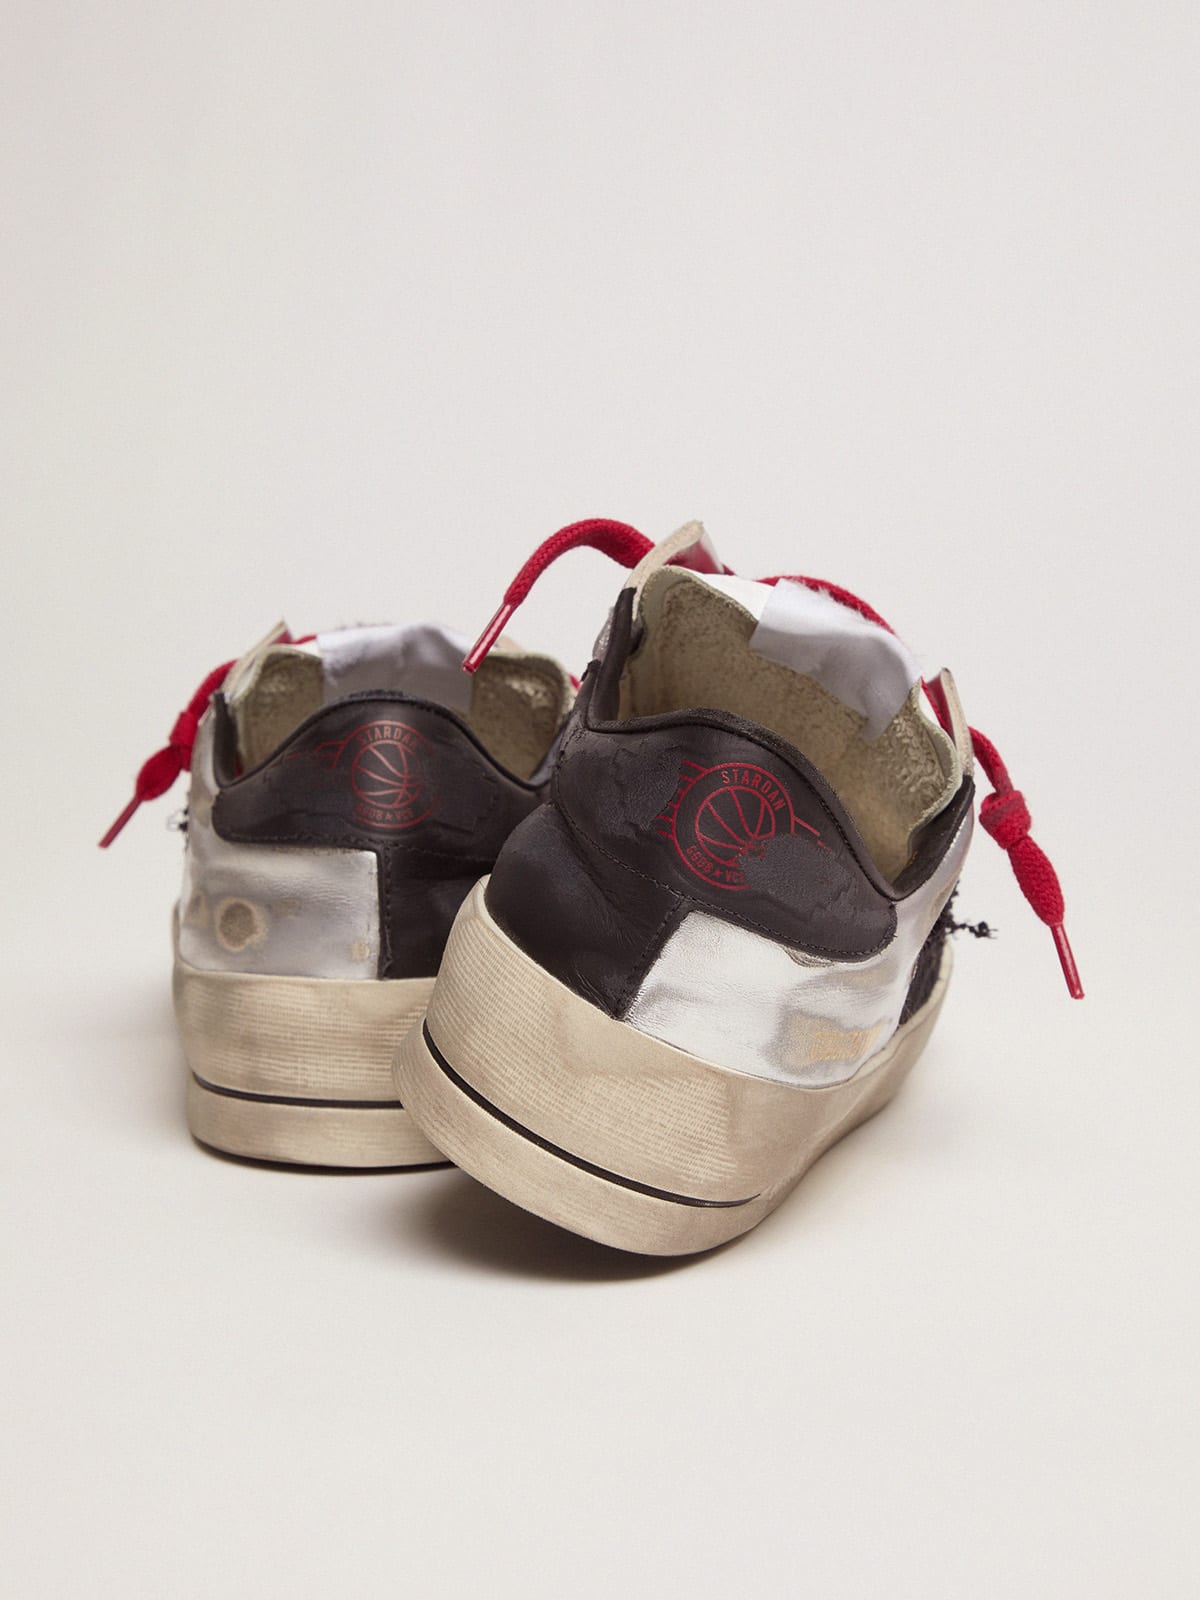 Golden Goose - Women's Limited Edition LAB silver and animal-print Stardan sneakers in 